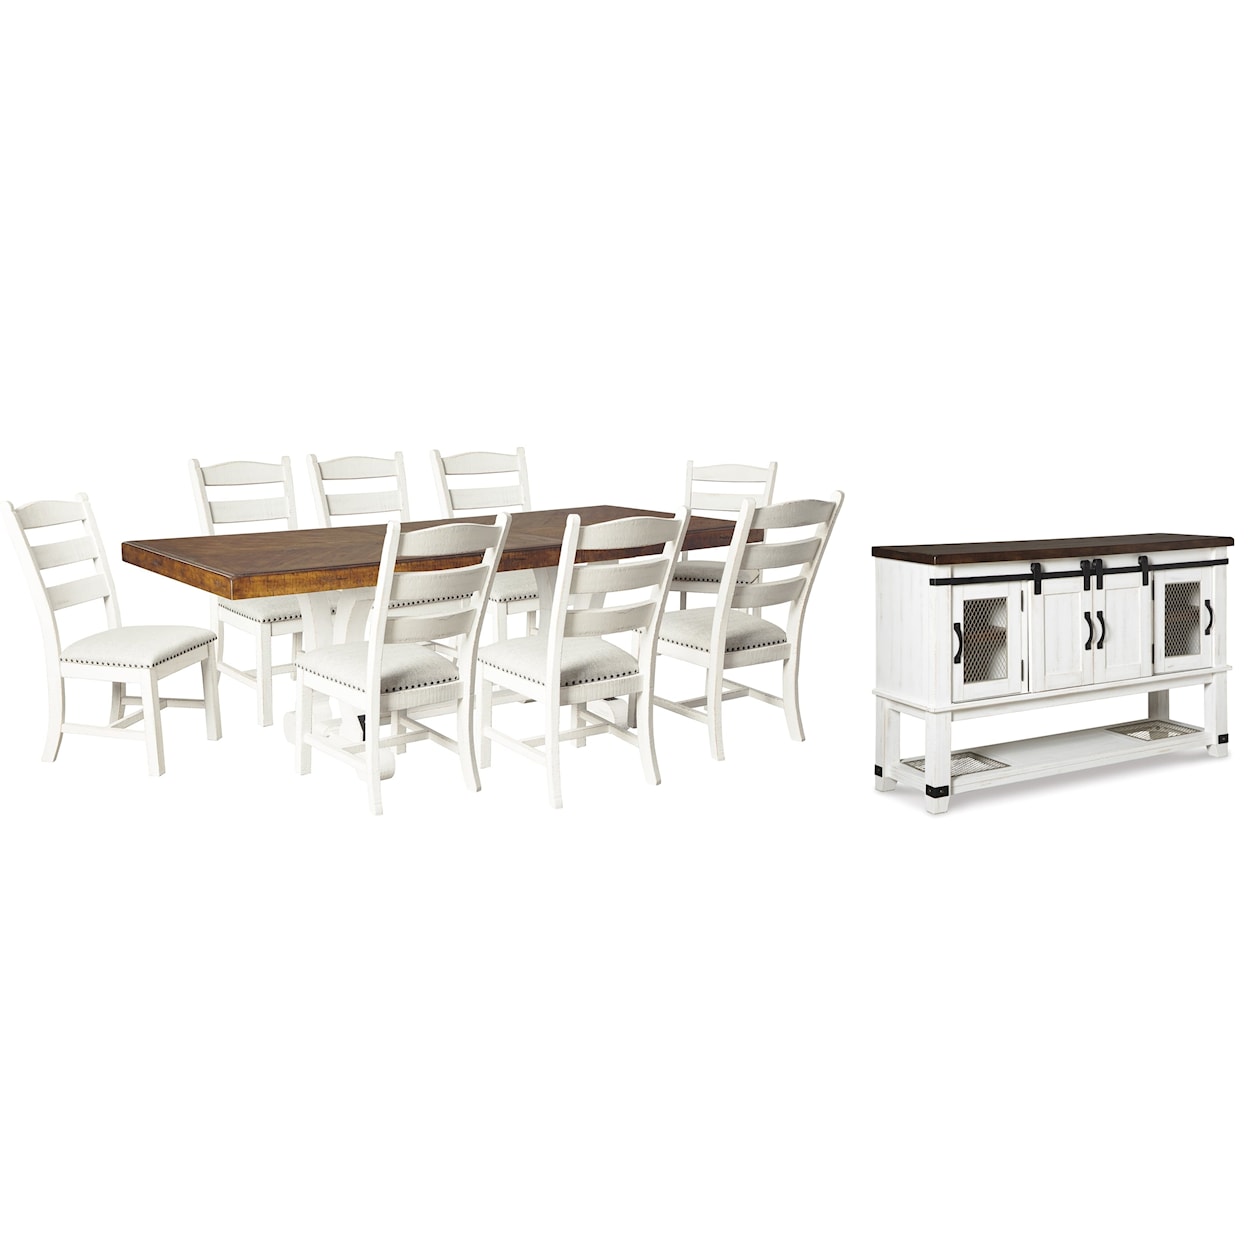 Michael Alan Select Valebeck Dining Table and 8 Chairs with Server